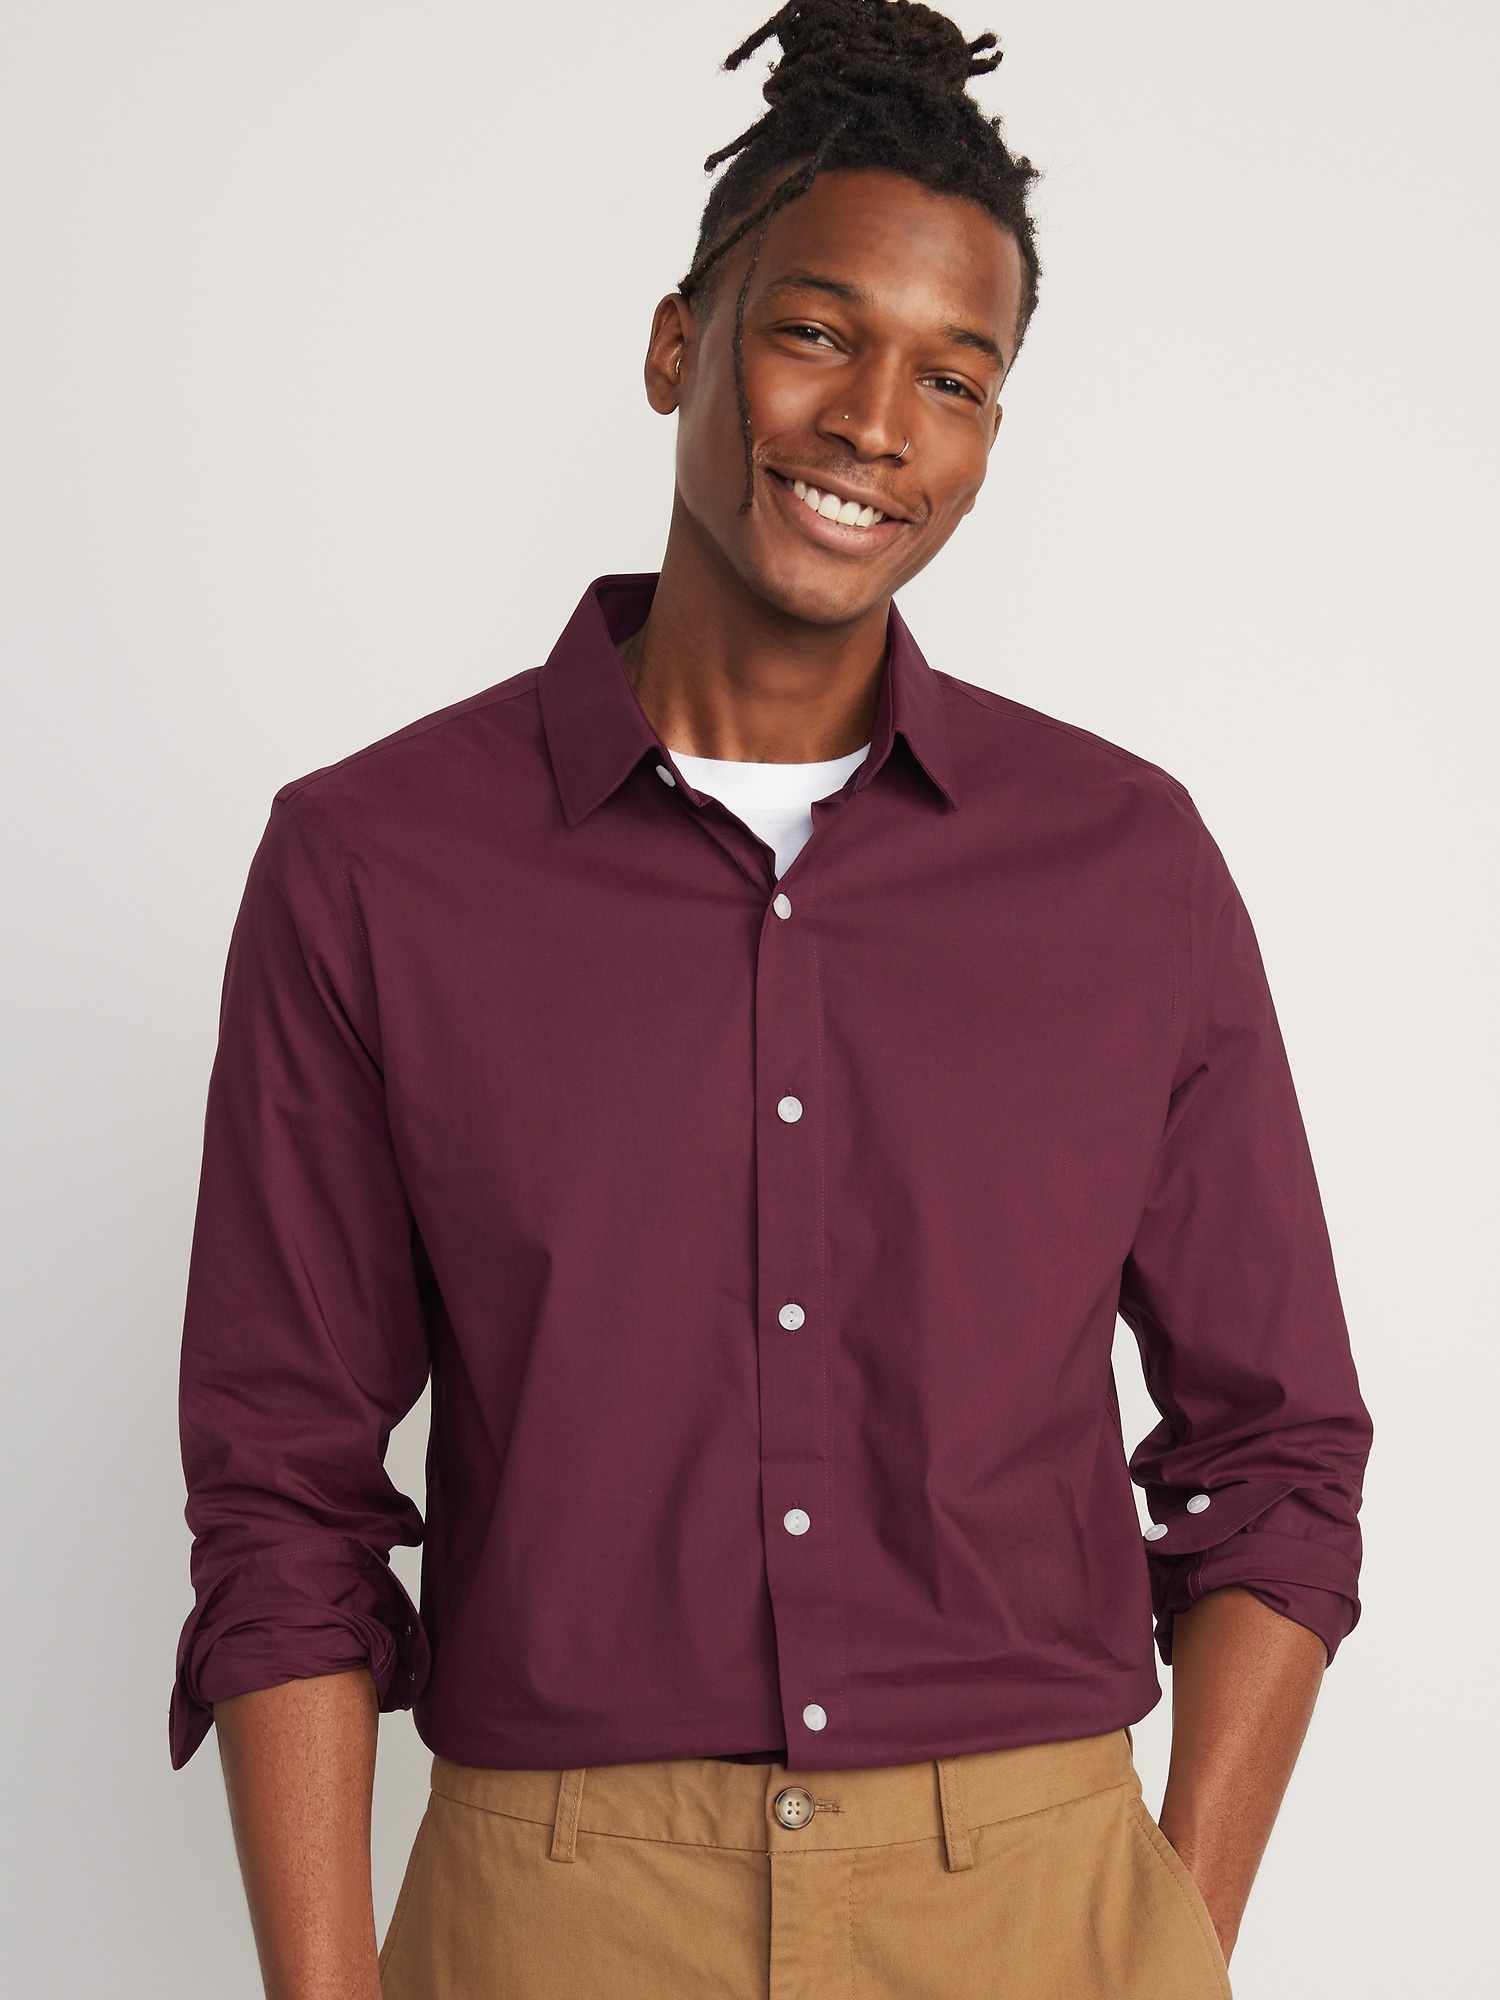 Old Navy Slim-Fit Pro Signature Performance Dress Shirt for Men red. 1